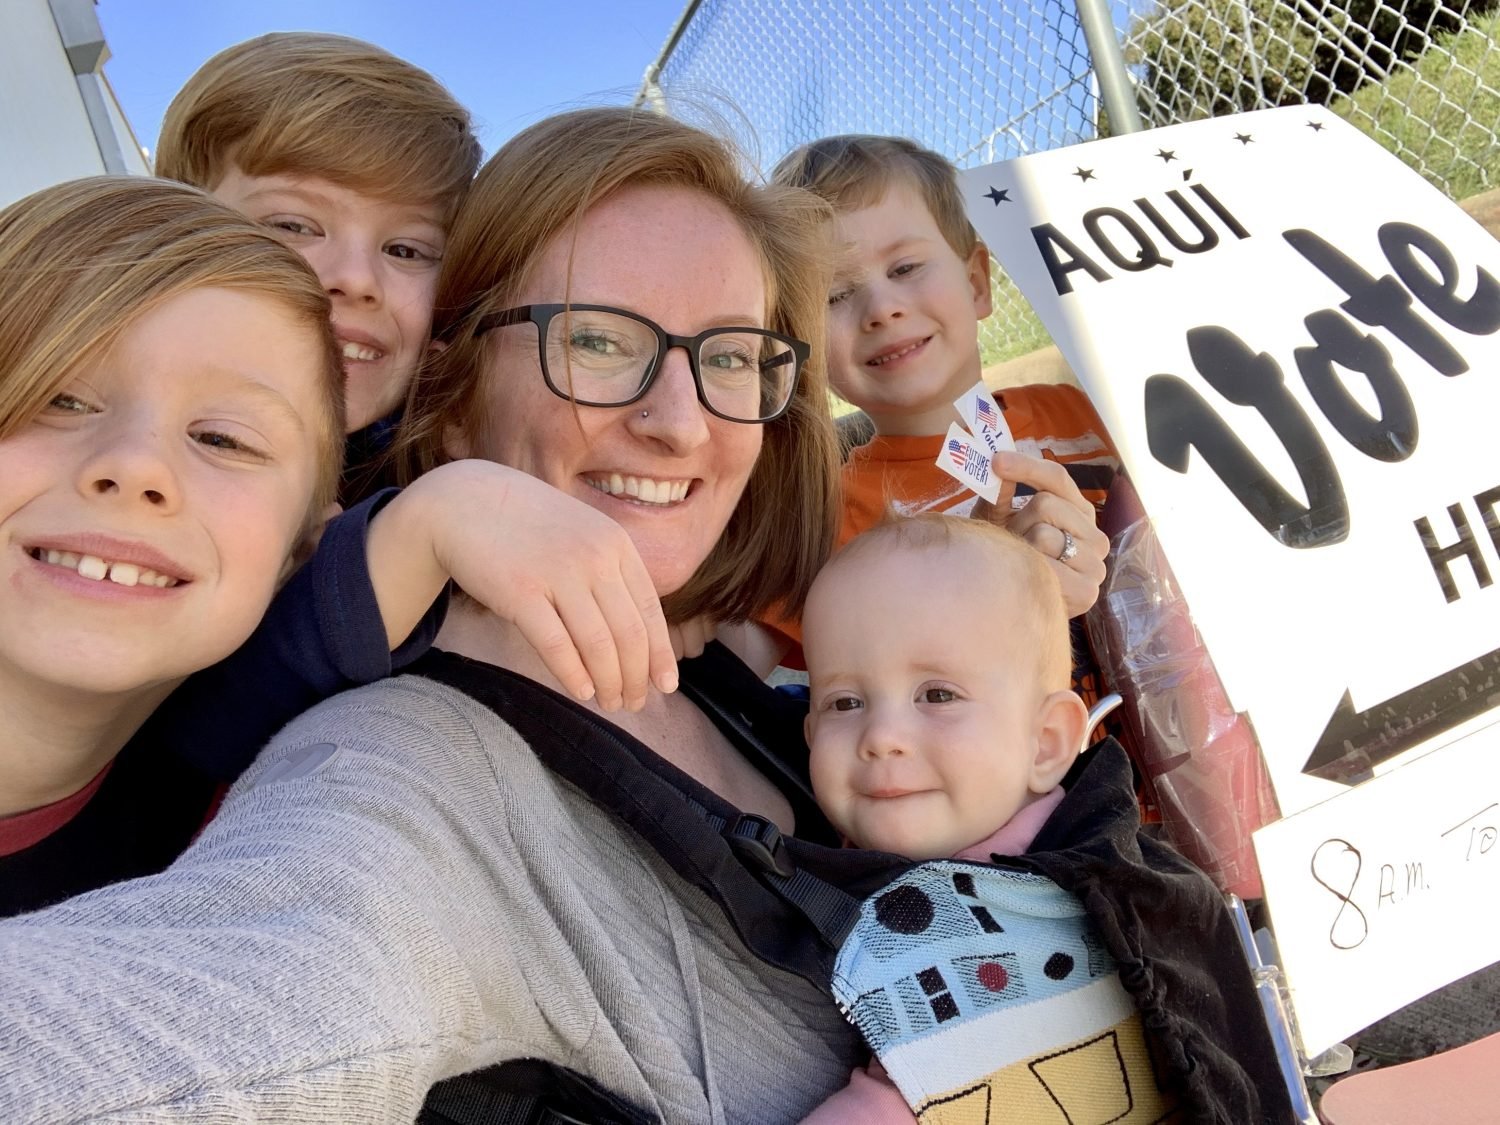 Parent wearing an infant in a carrier surrounded by 3 other preschool age children next to a sign saying “Aquí Vote Here” and they are holding “I voted” stickers.